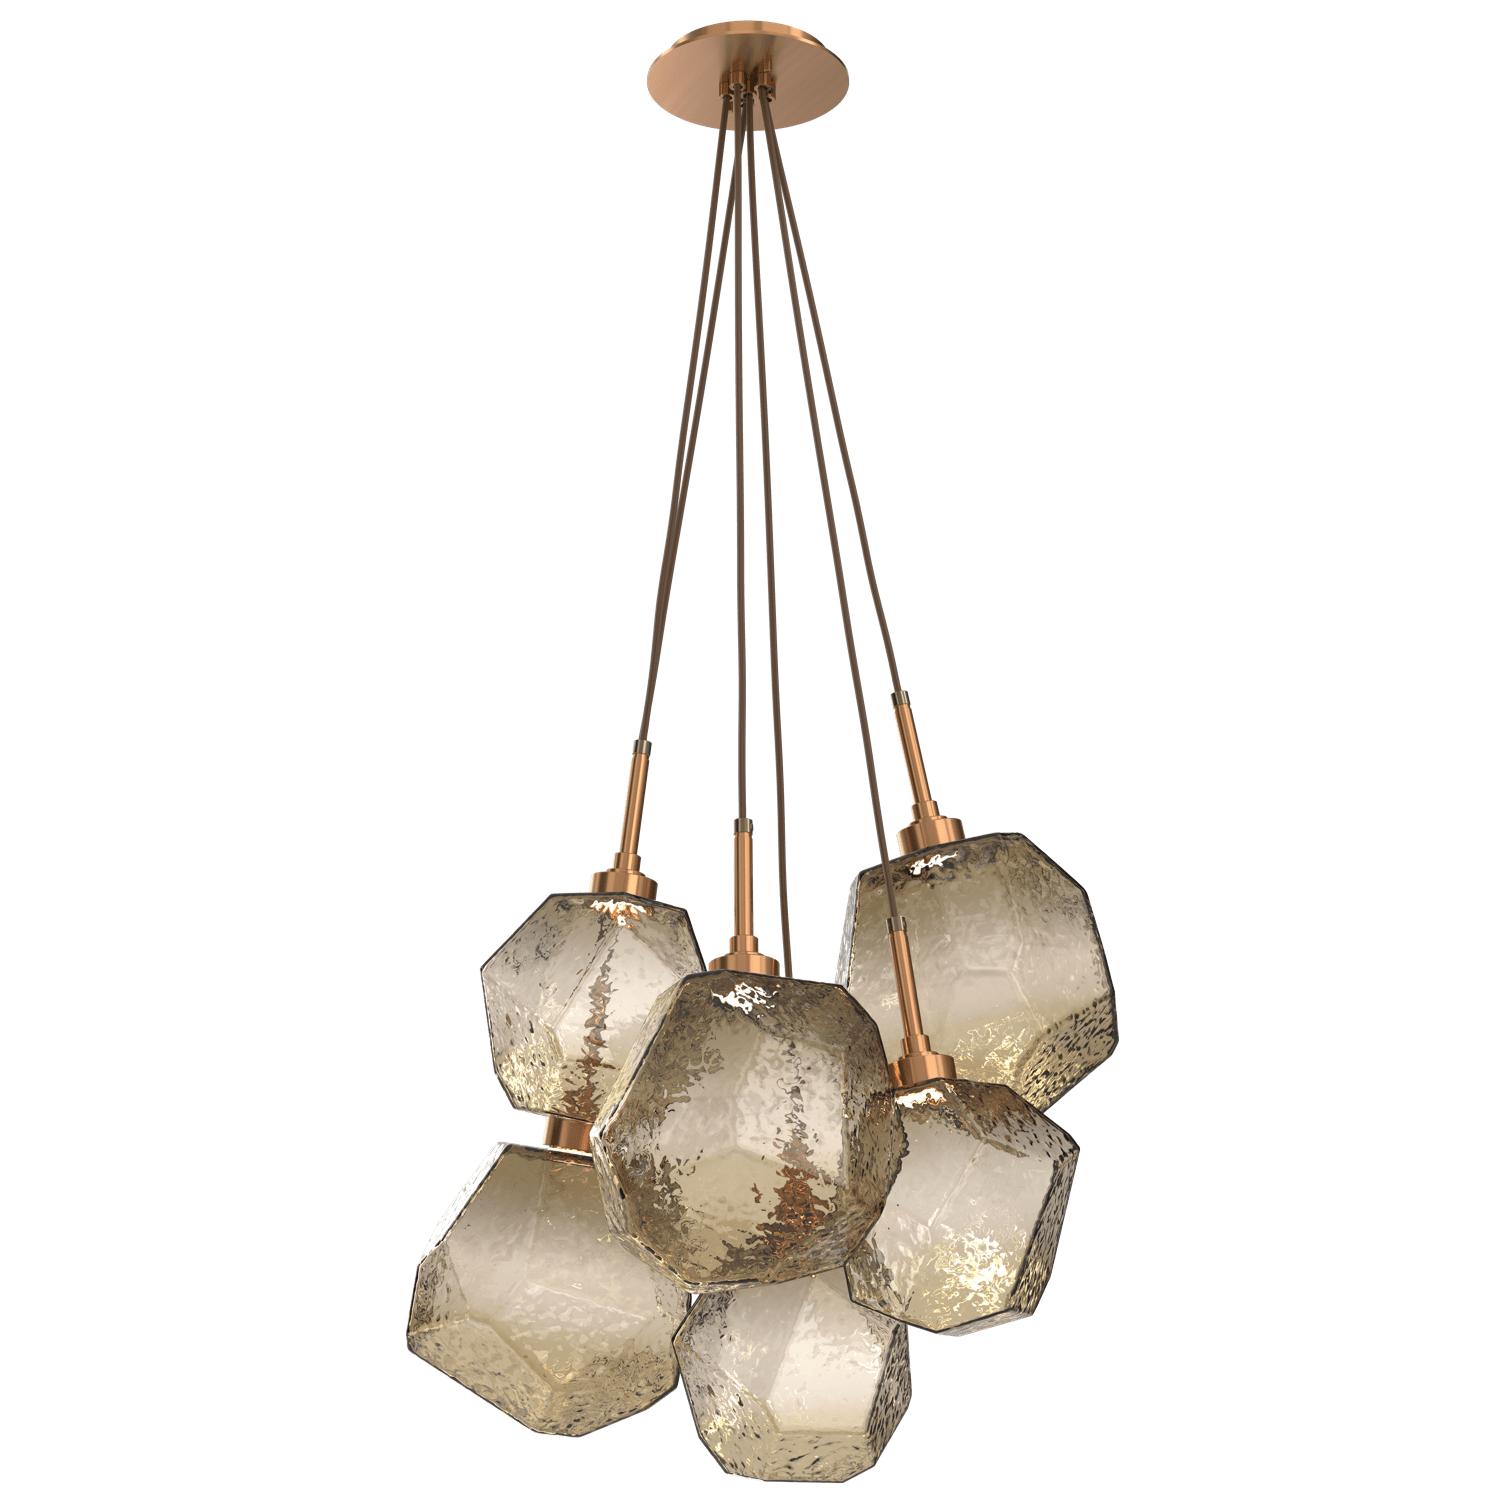 CHB0039-0F-RB-B-Hammerton-Studio-Gem-6-light-cluster-pendant-light-with-oil-rubbed-bronze-finish-and-bronze-blown-glass-shades-and-LED-lamping